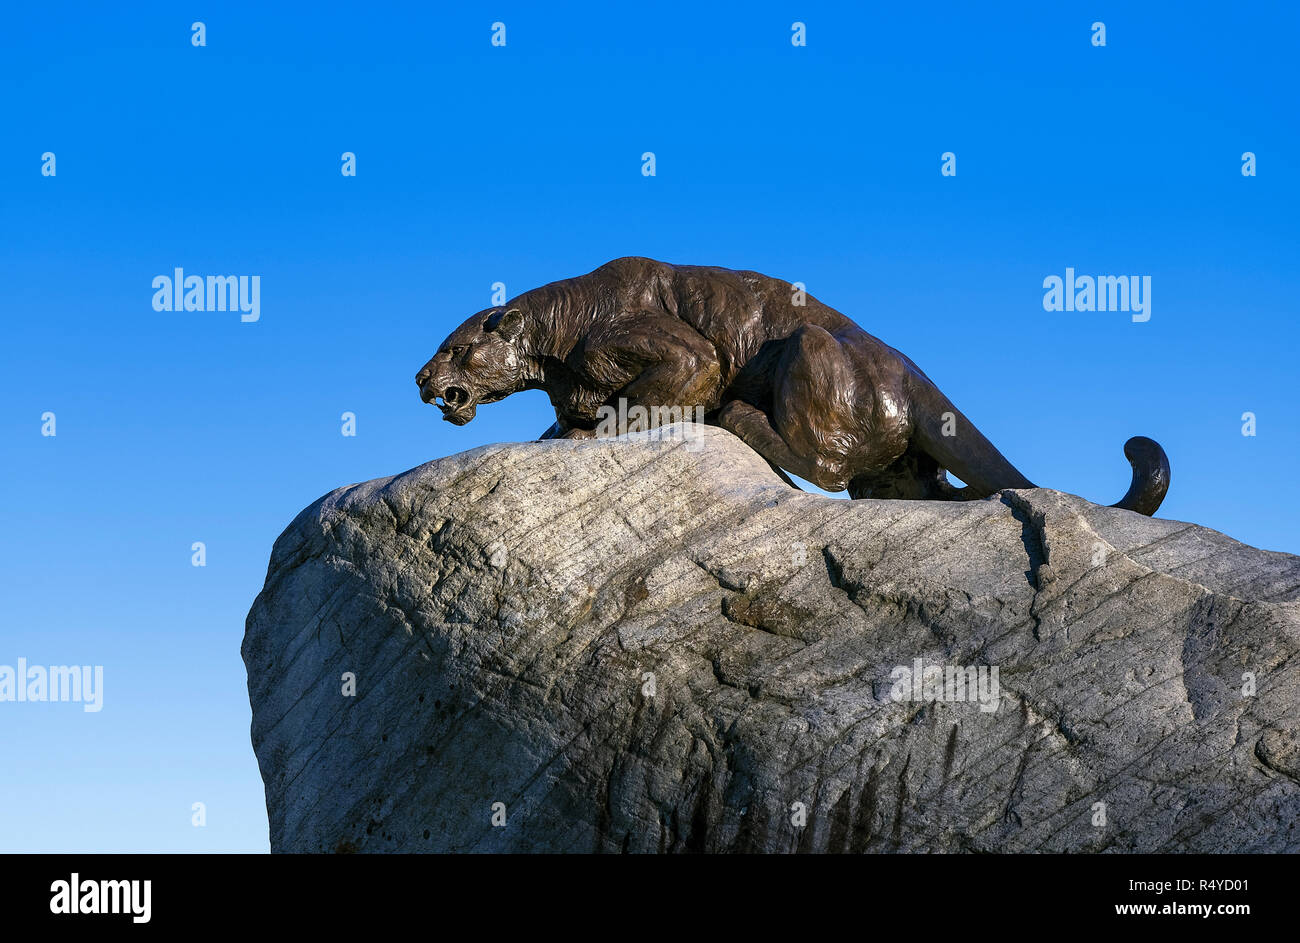 Panther mascot Skulptur am Middlebury College Campus, Middlebury, Vermont, USA. Stockfoto